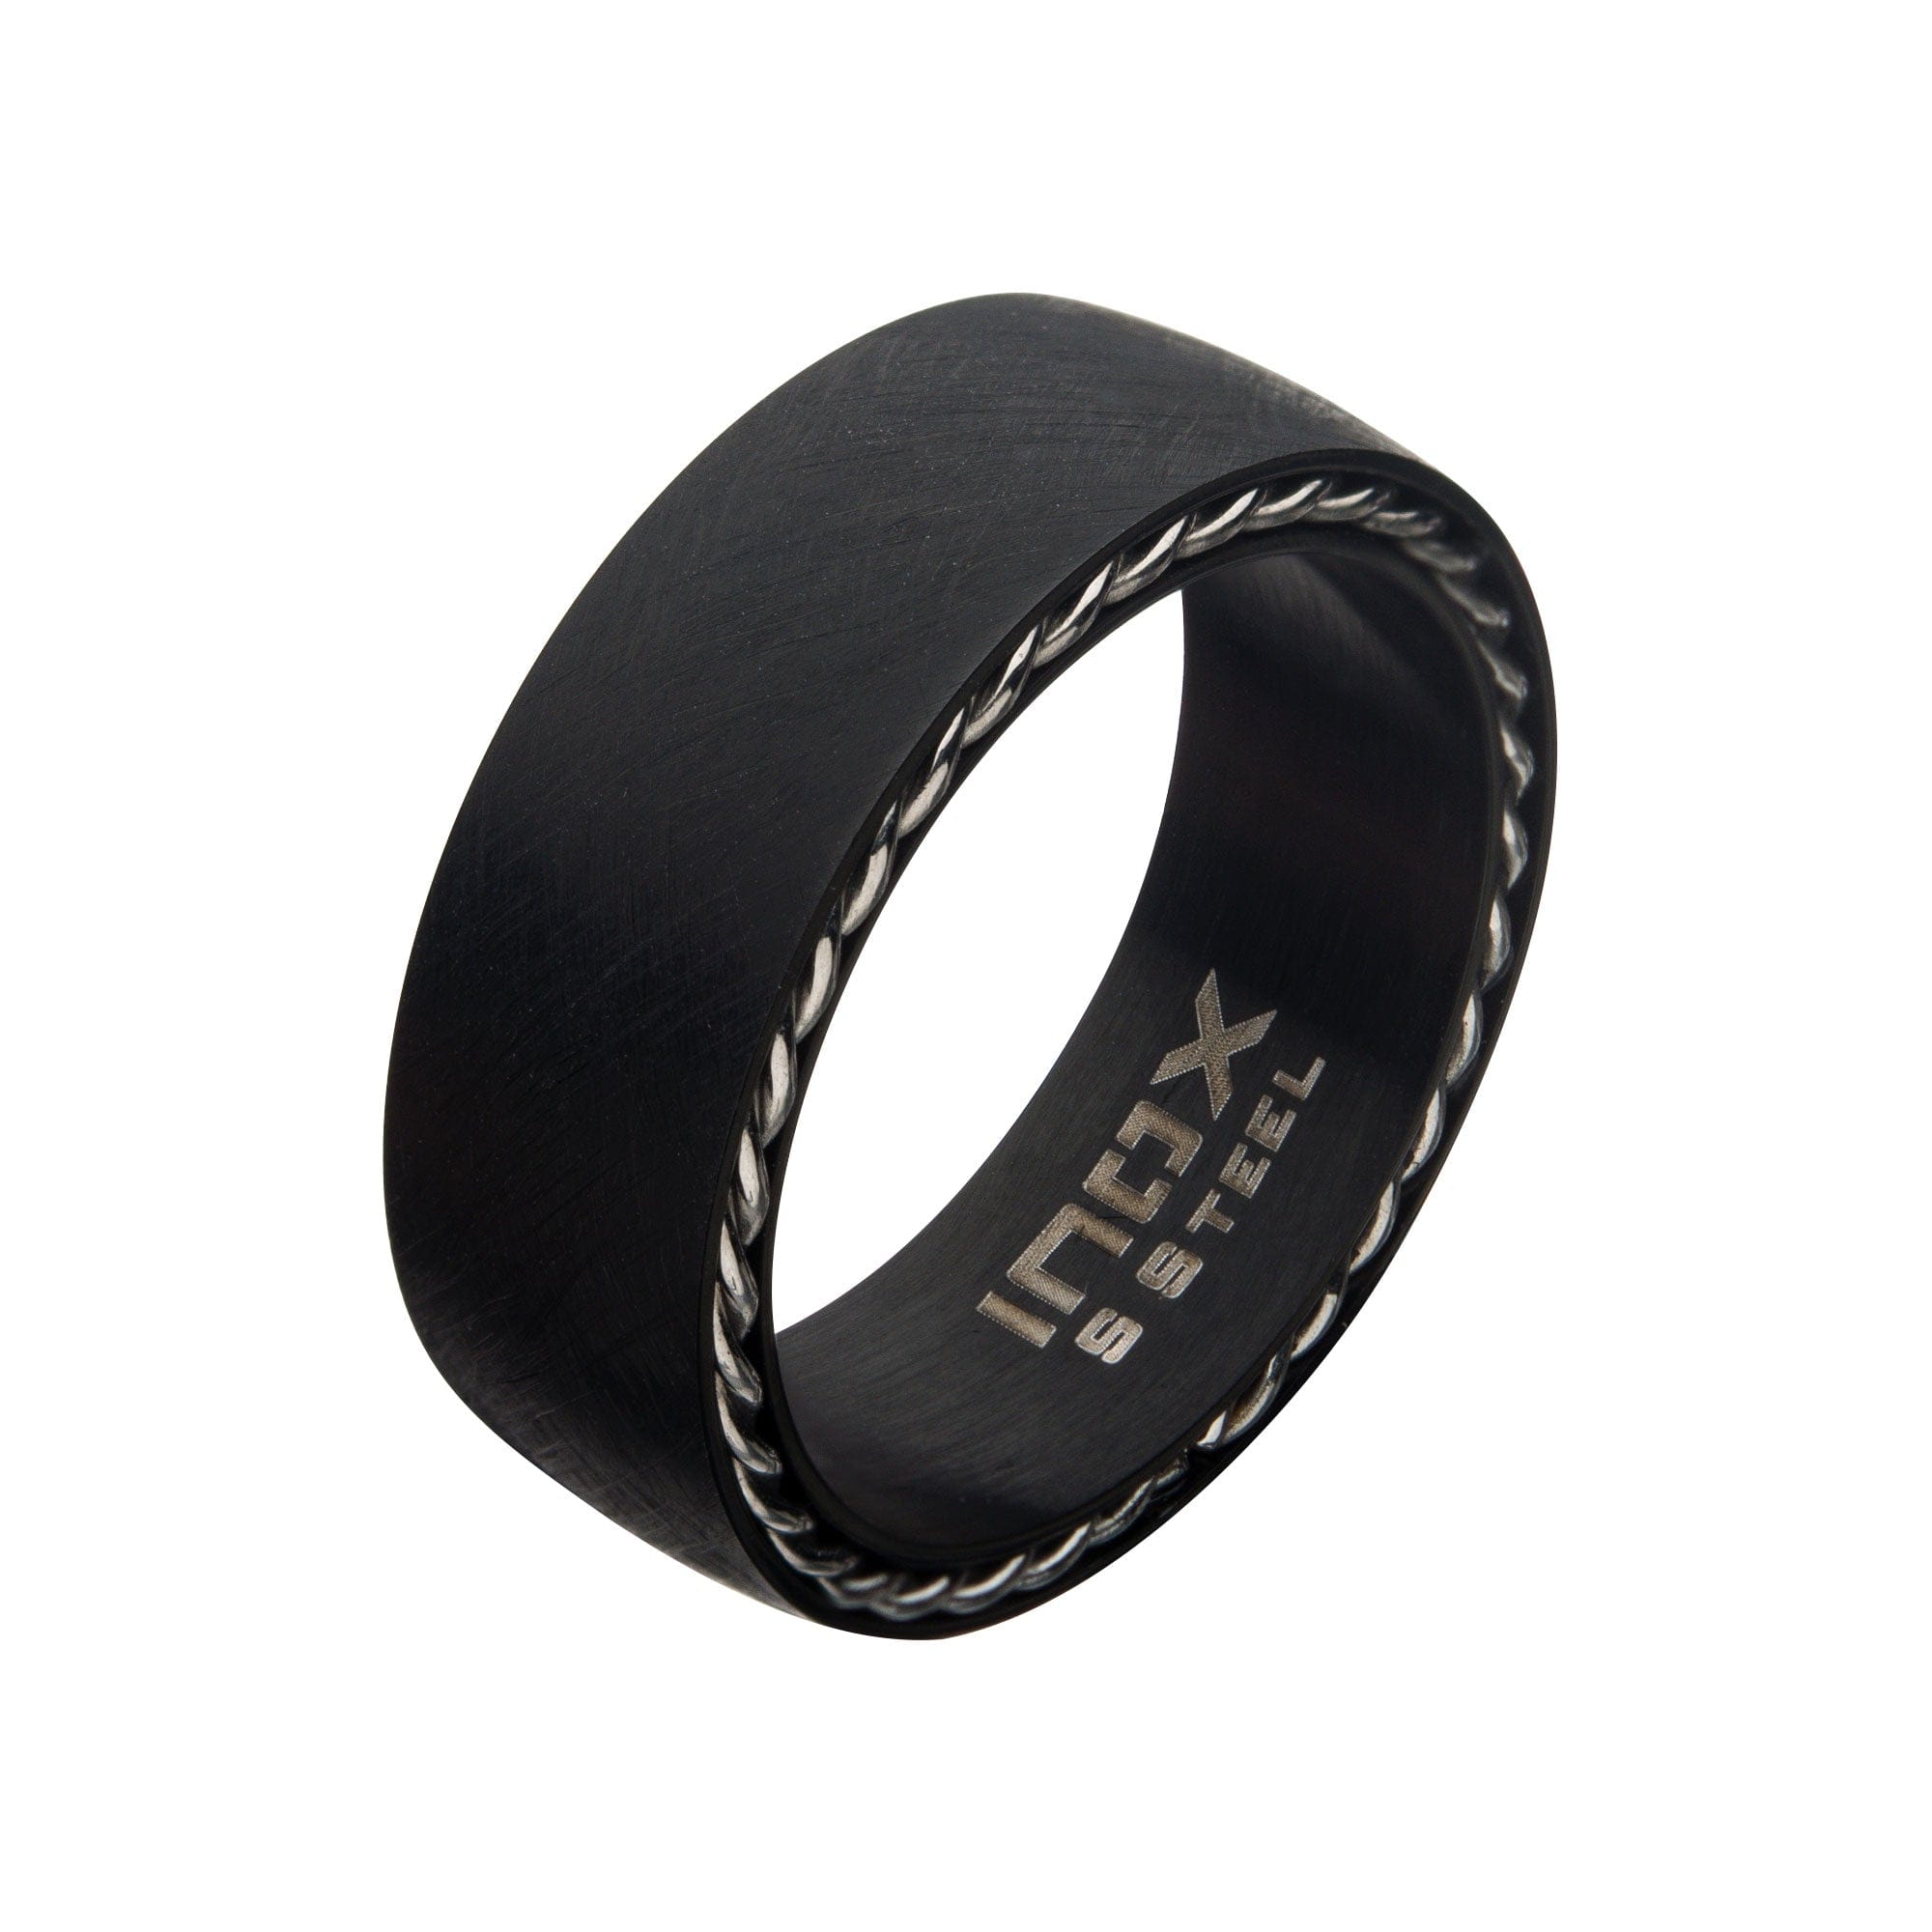 INOX JEWELRY Rings Black Stainless Steel Sand Finish Carbon Fiber and Cable Twisted Band